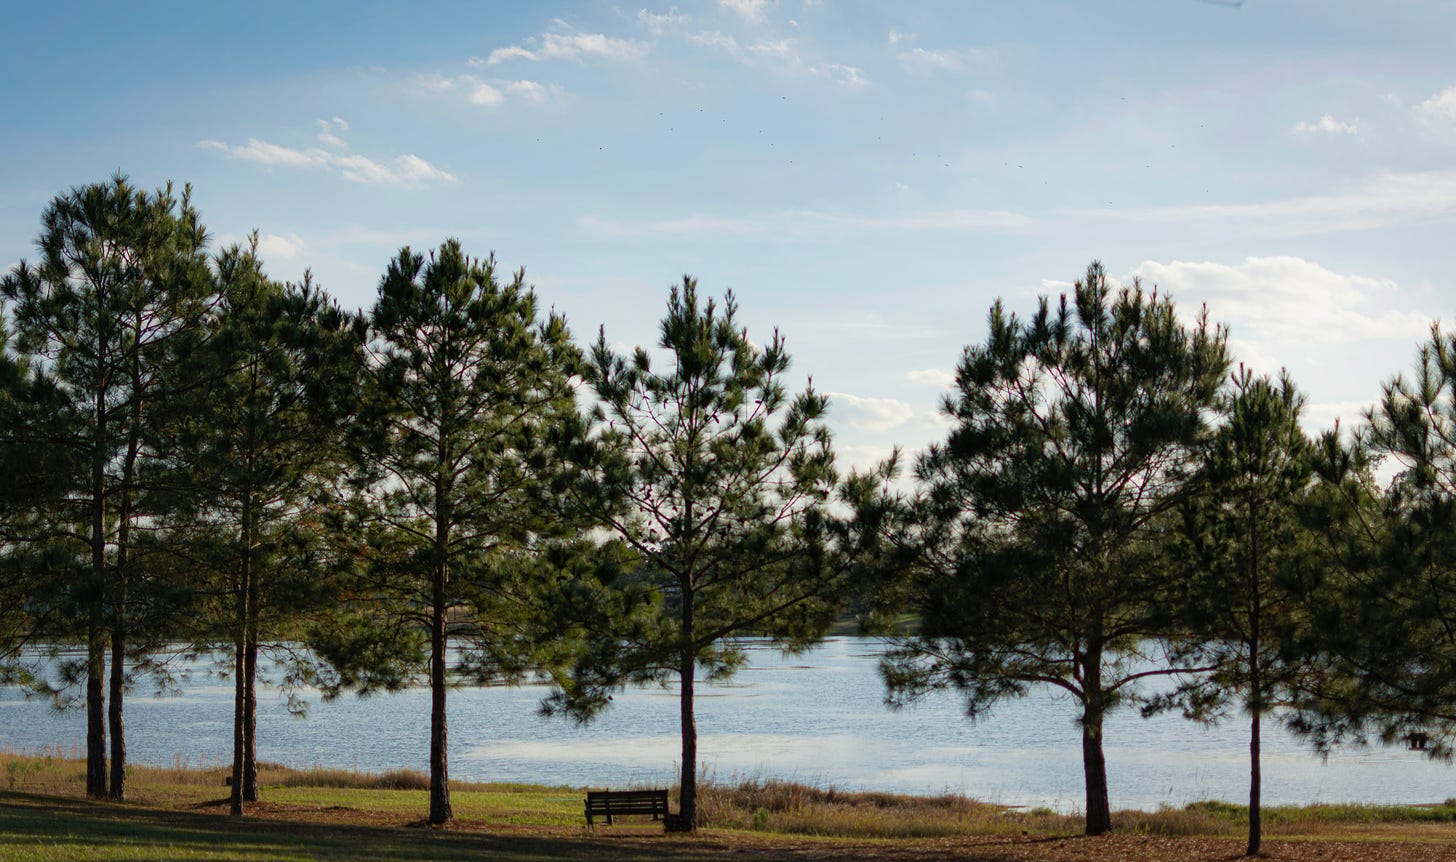 A stand of pine trees on the lake shore with blue skies and whispy white clouds above.